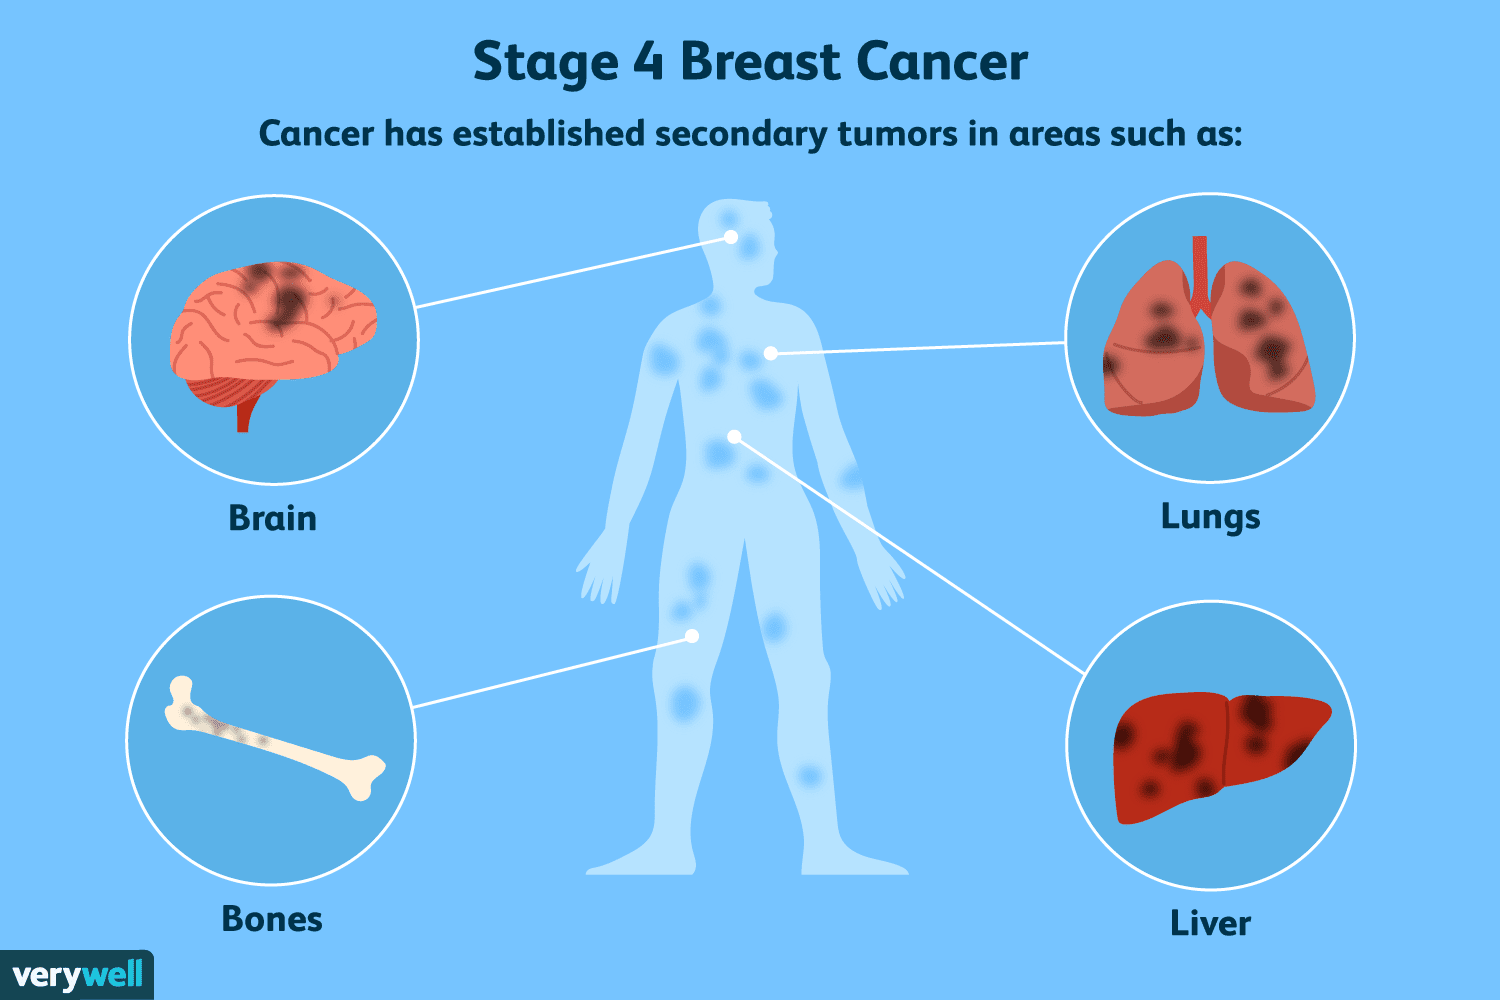 Stage 4 Breast Cancer: Diagnosis, Treatment, Survival